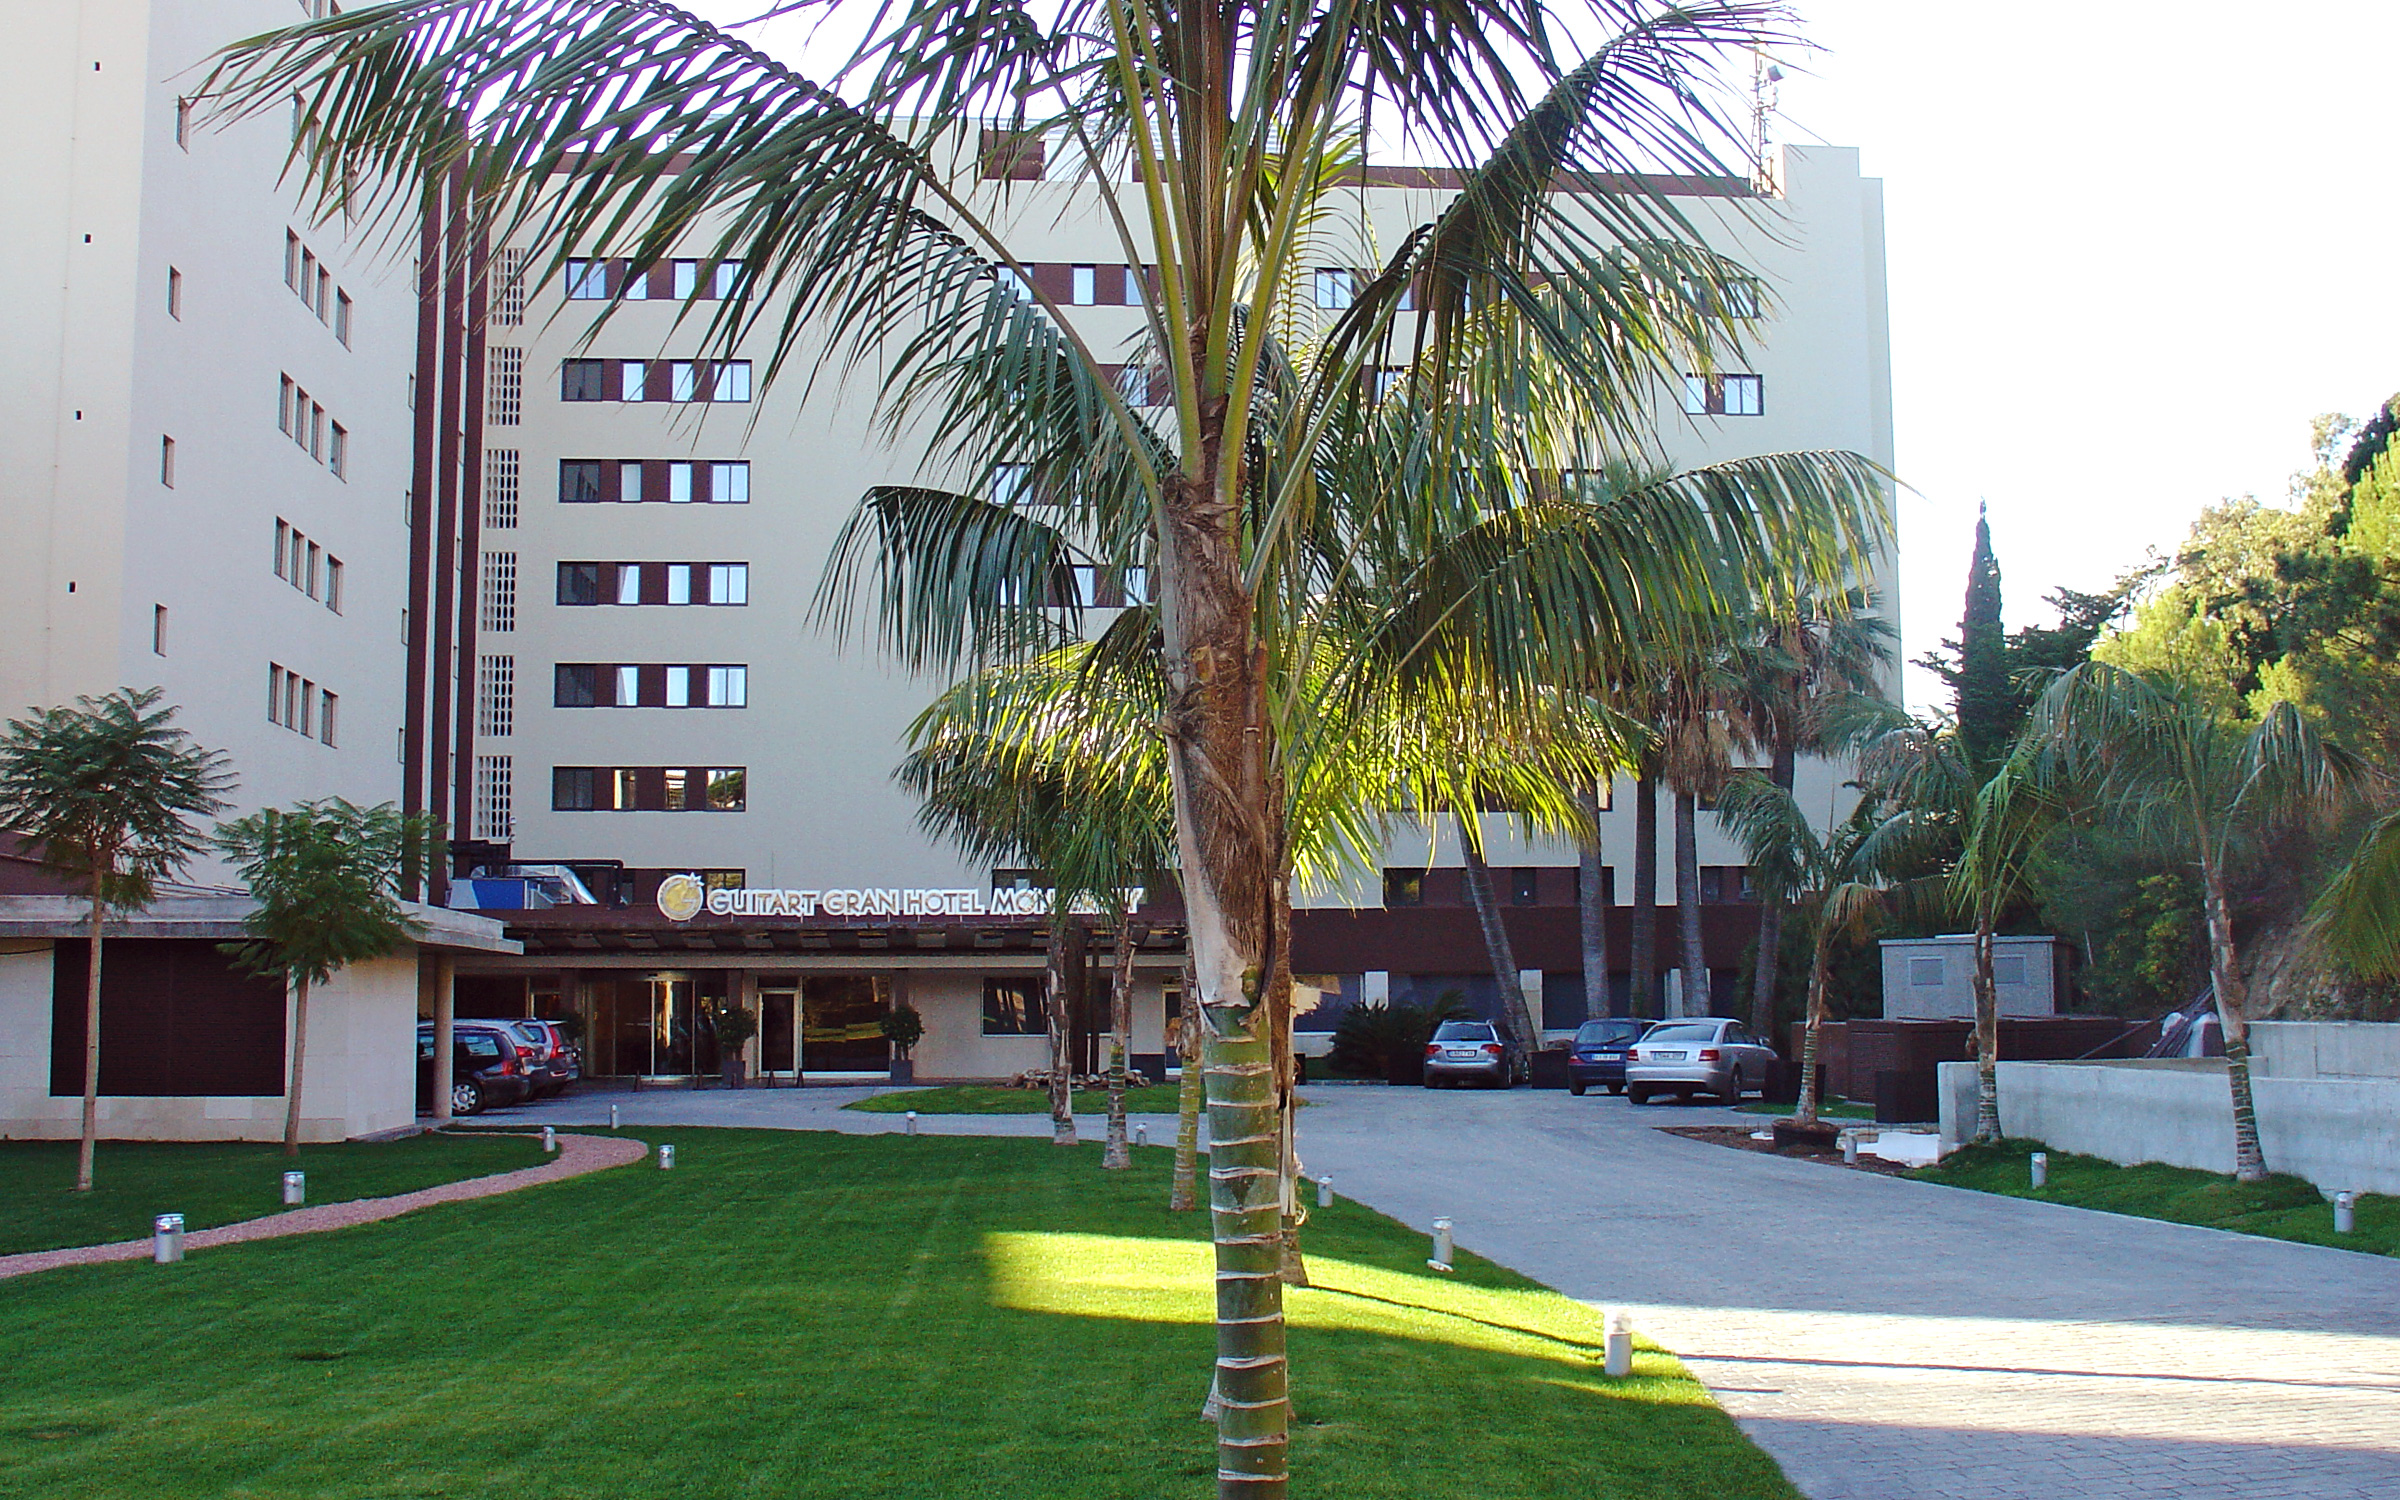 Lawn, palm trees and driveway infront of a hotel